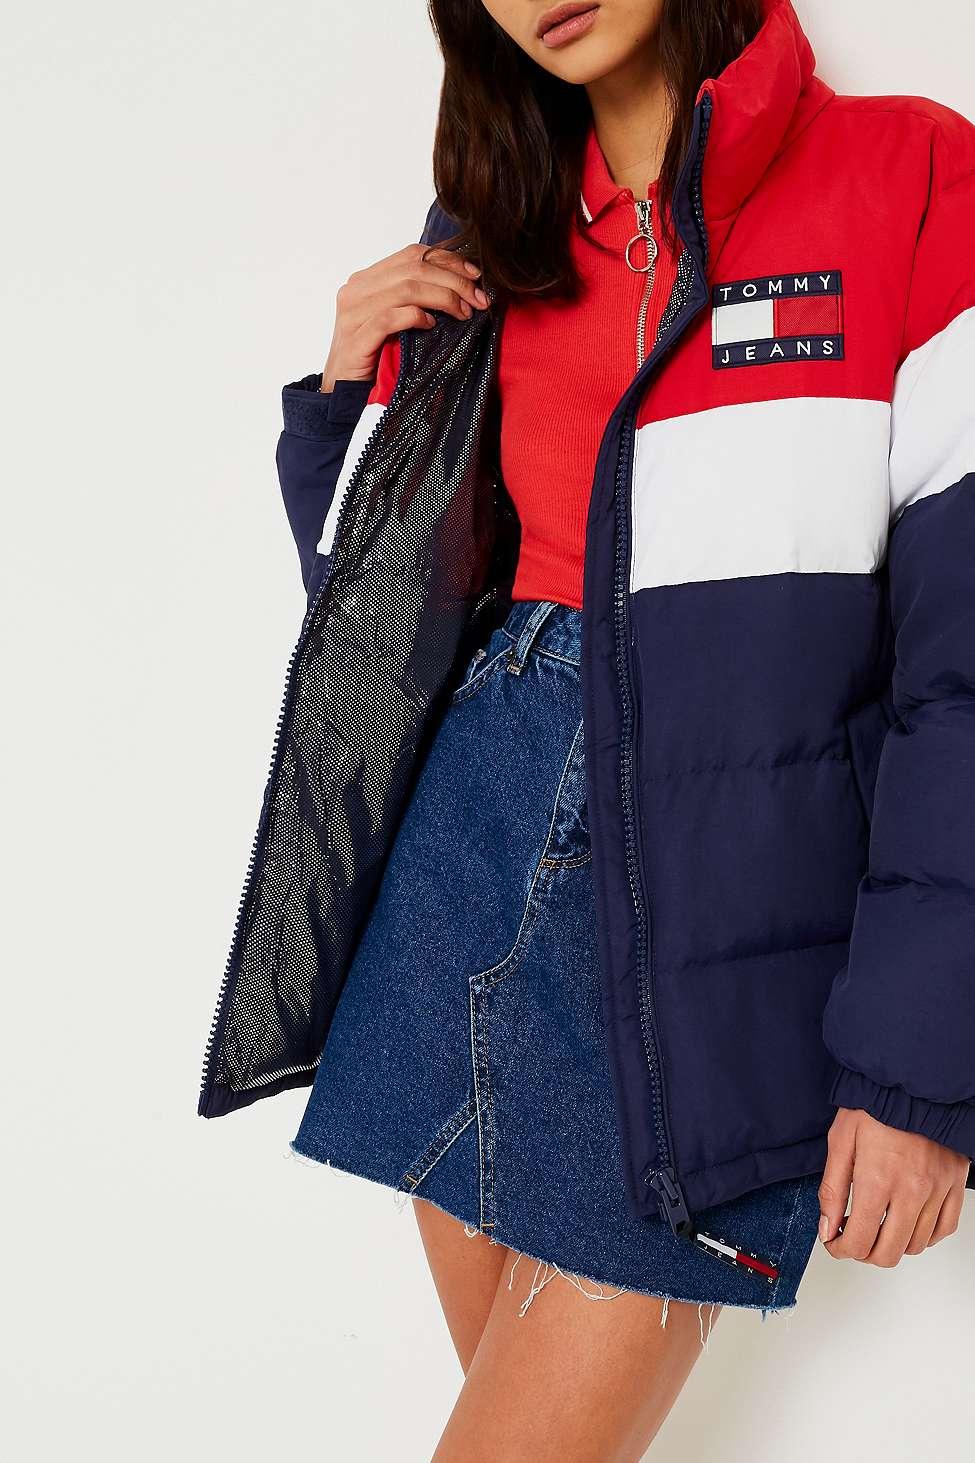 Tommy Hilfiger Red White And Blue Puffer Jacket Factory Sale, 55% OFF |  www.velocityusa.com